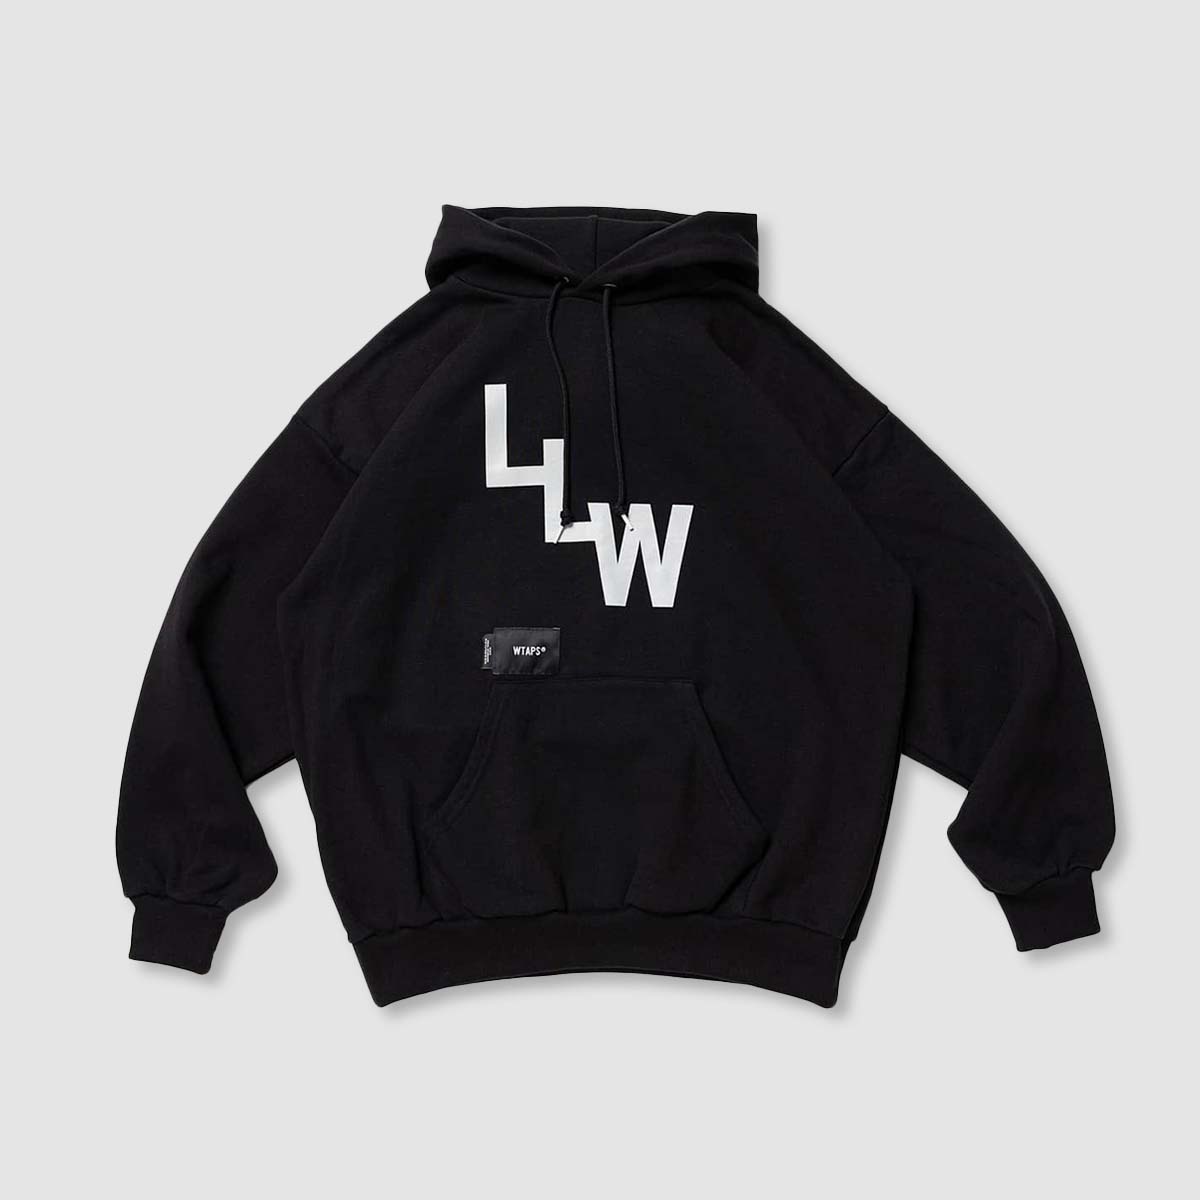 LLW / HOODY / COTTON - INVINCIBLE